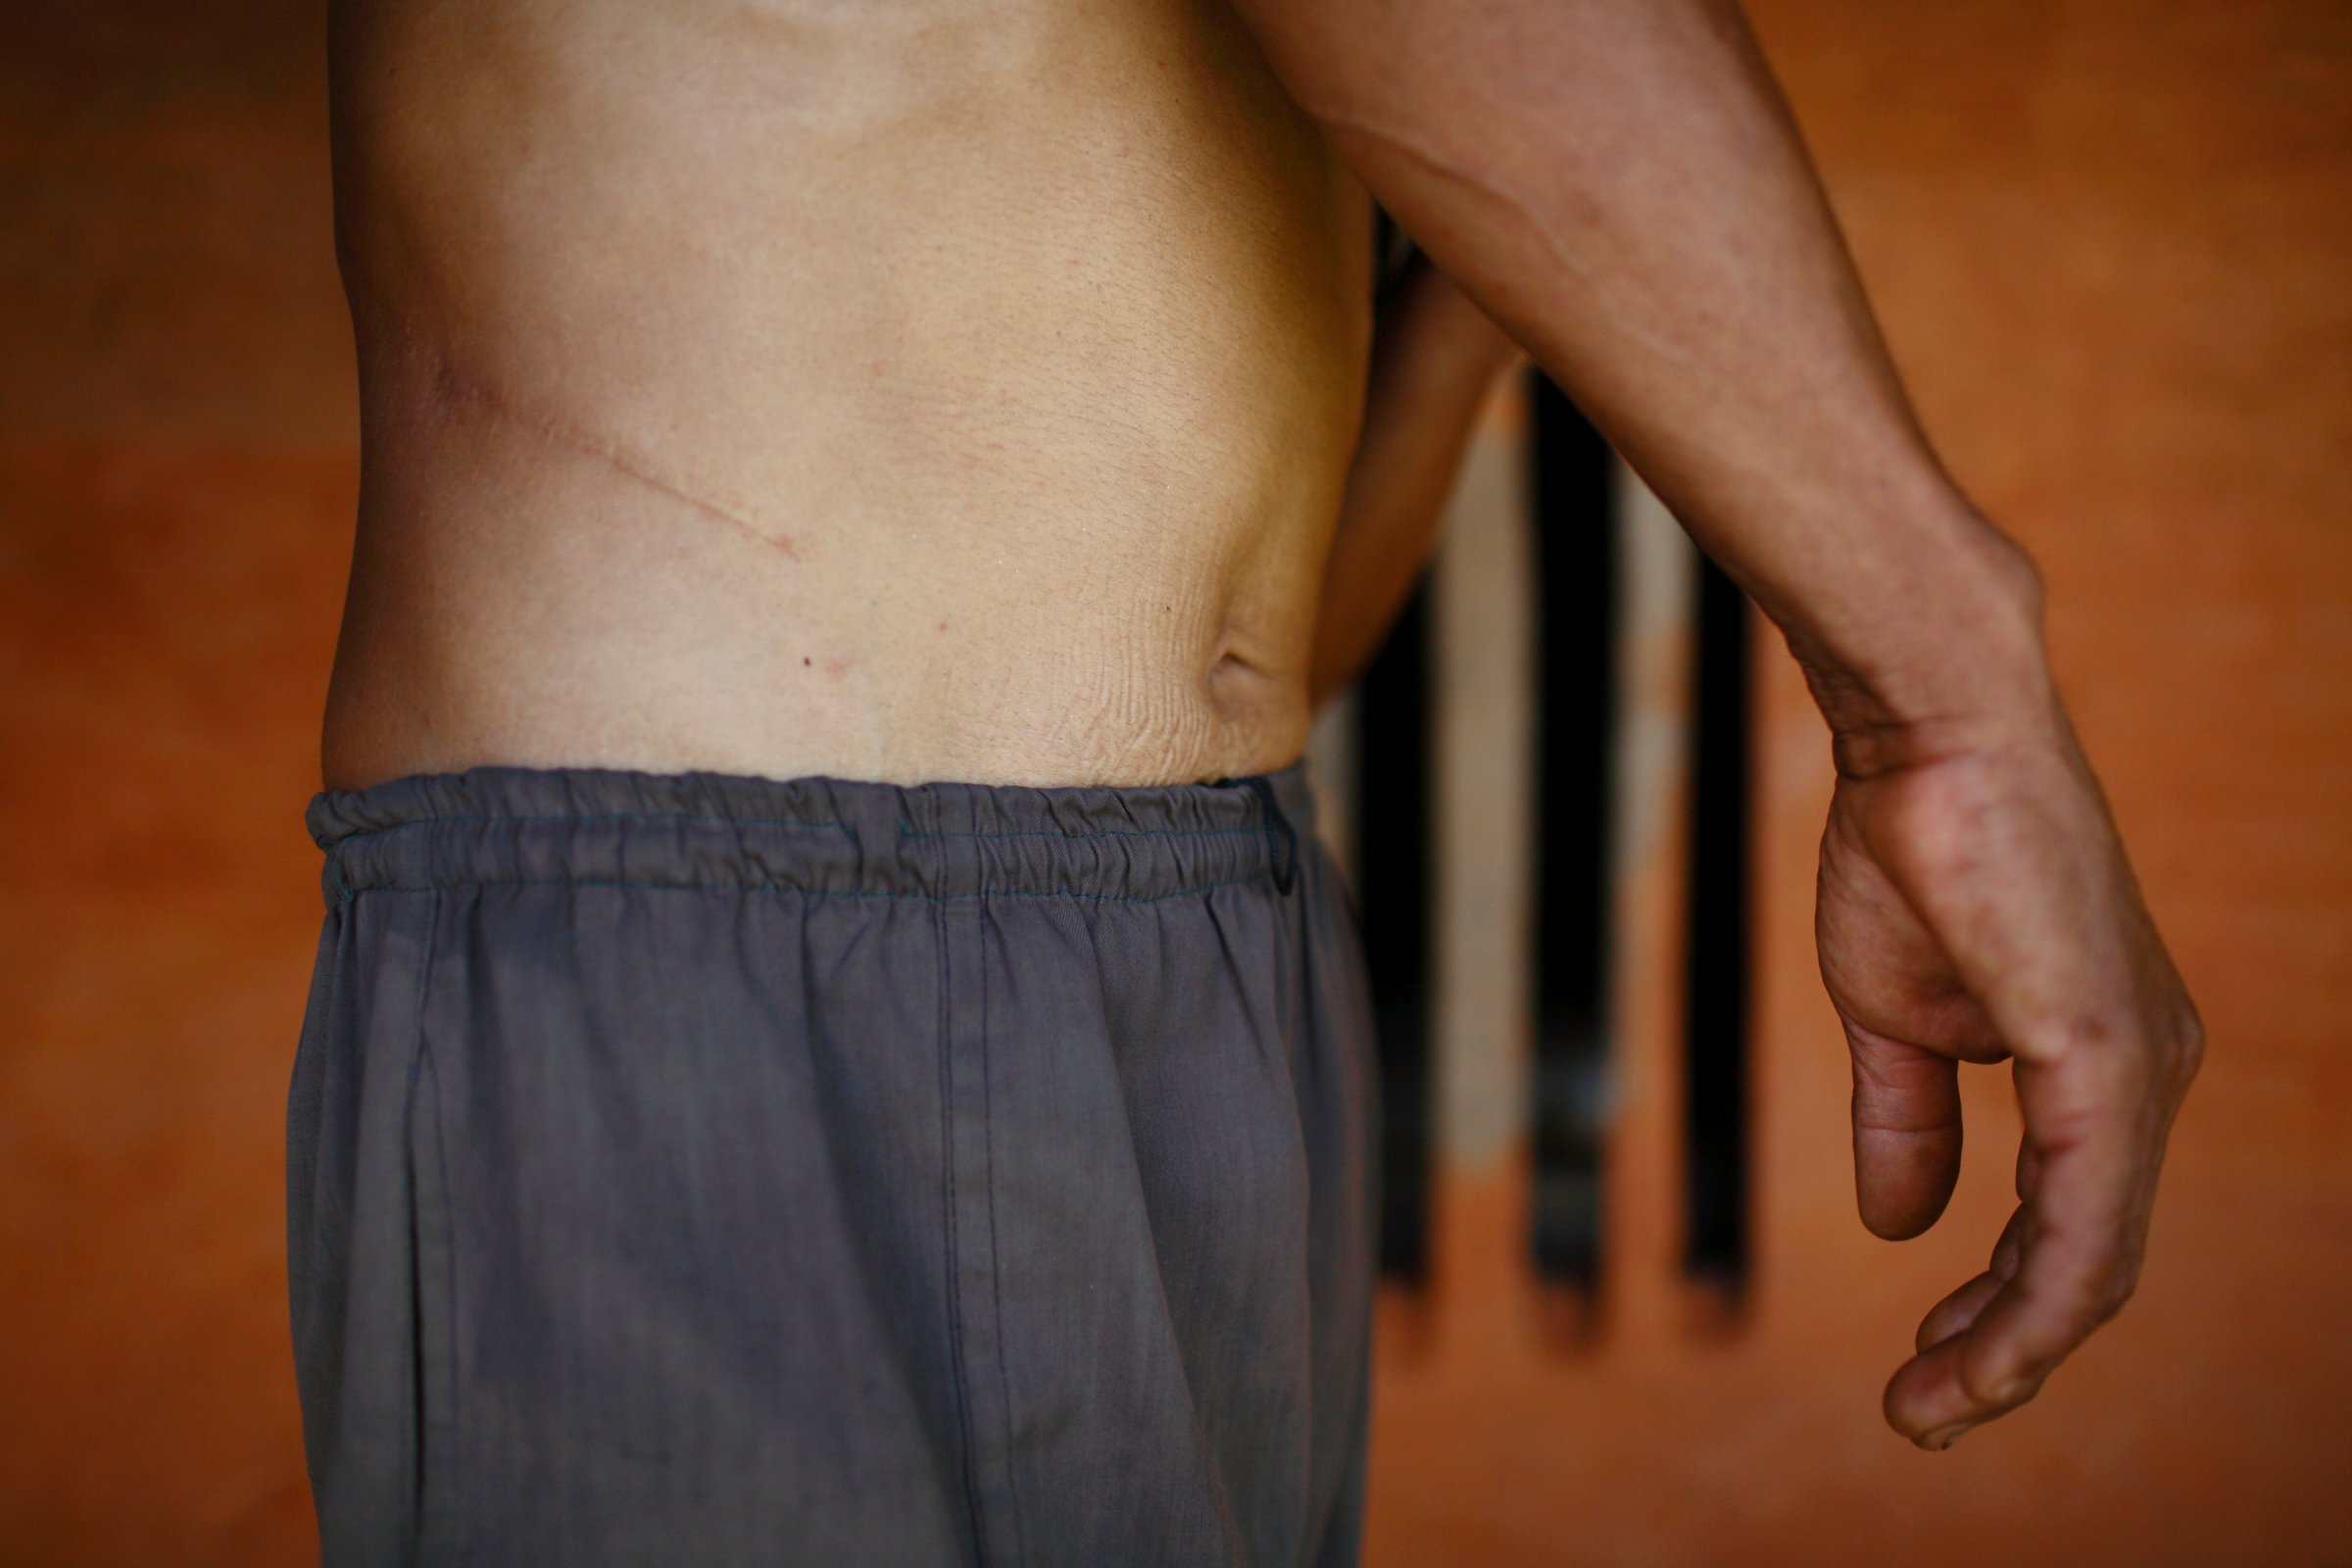 Man Bahadur Tamang, 51, who sold his kidney for 64,000 Nepalese rupees ($727) due to poverty, shows the incision scar from the operation, at his home in Kavre